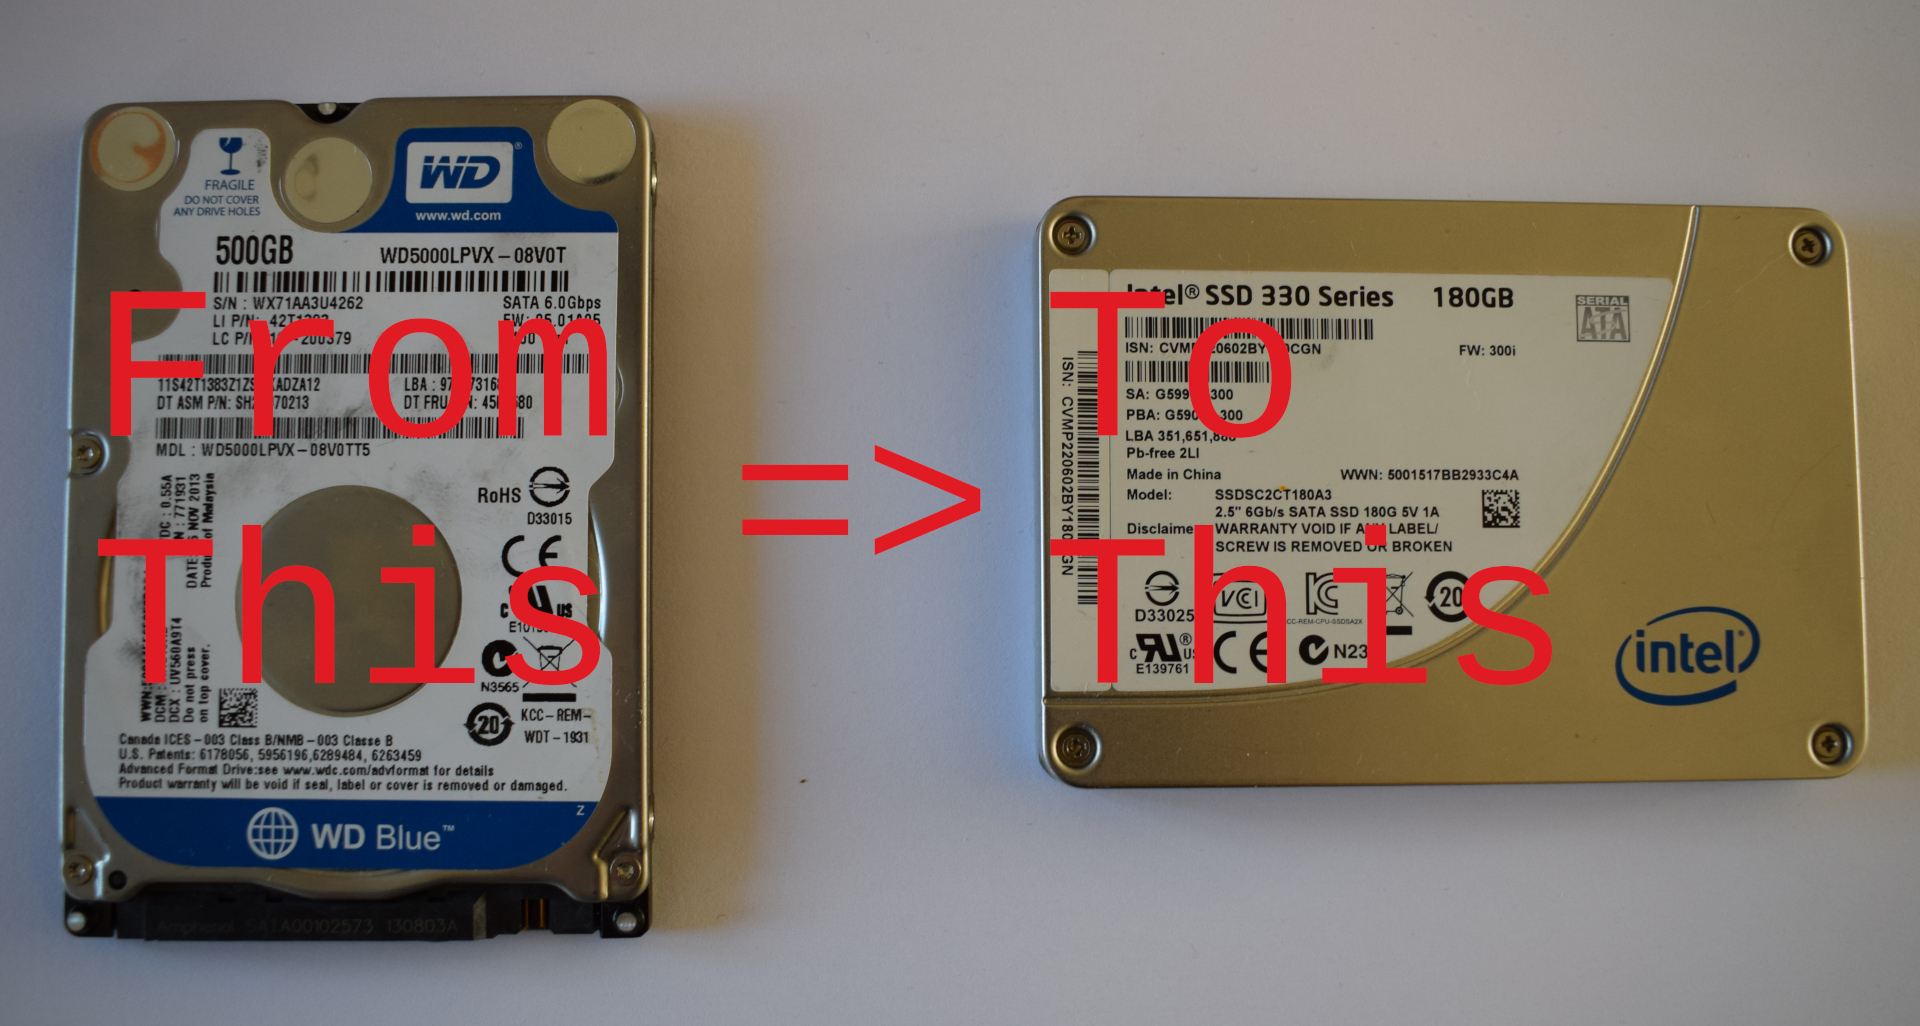 From Hard drive to SSD